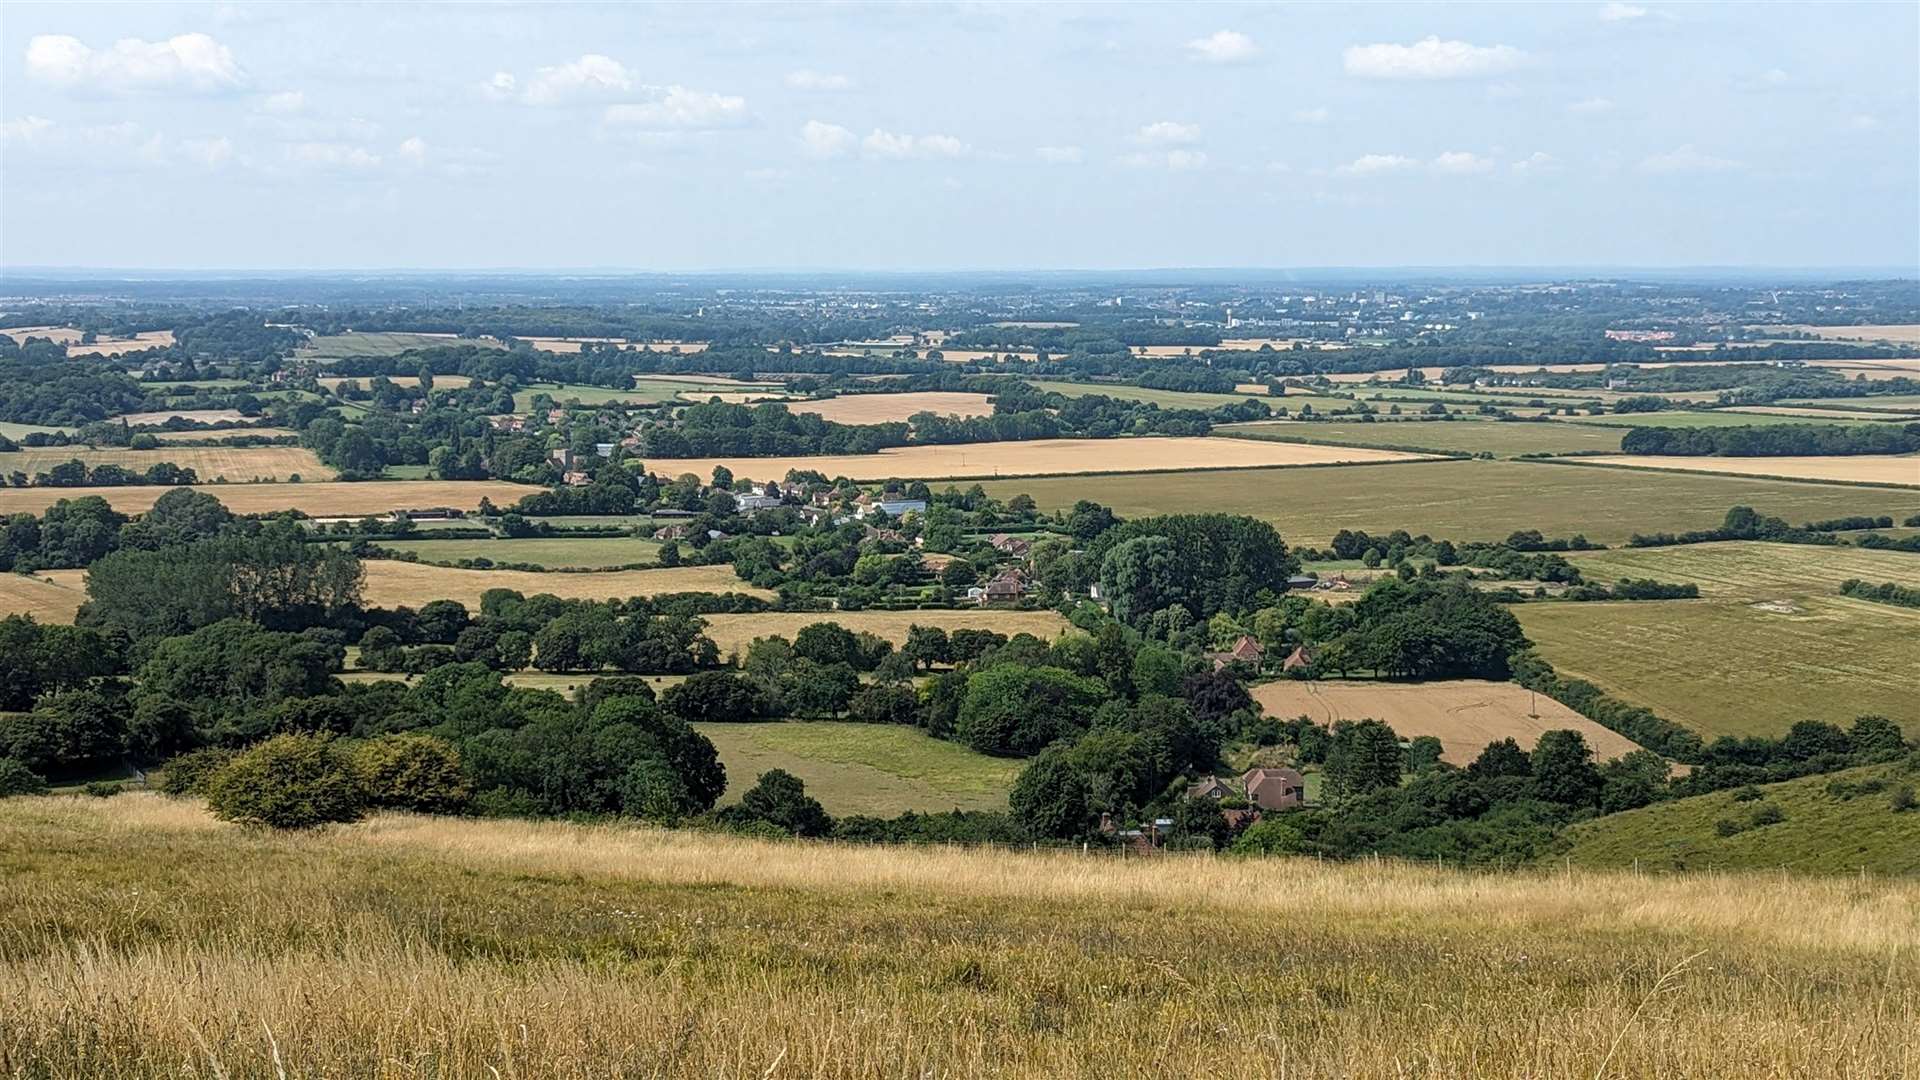 The Downs offer incredible views for miles